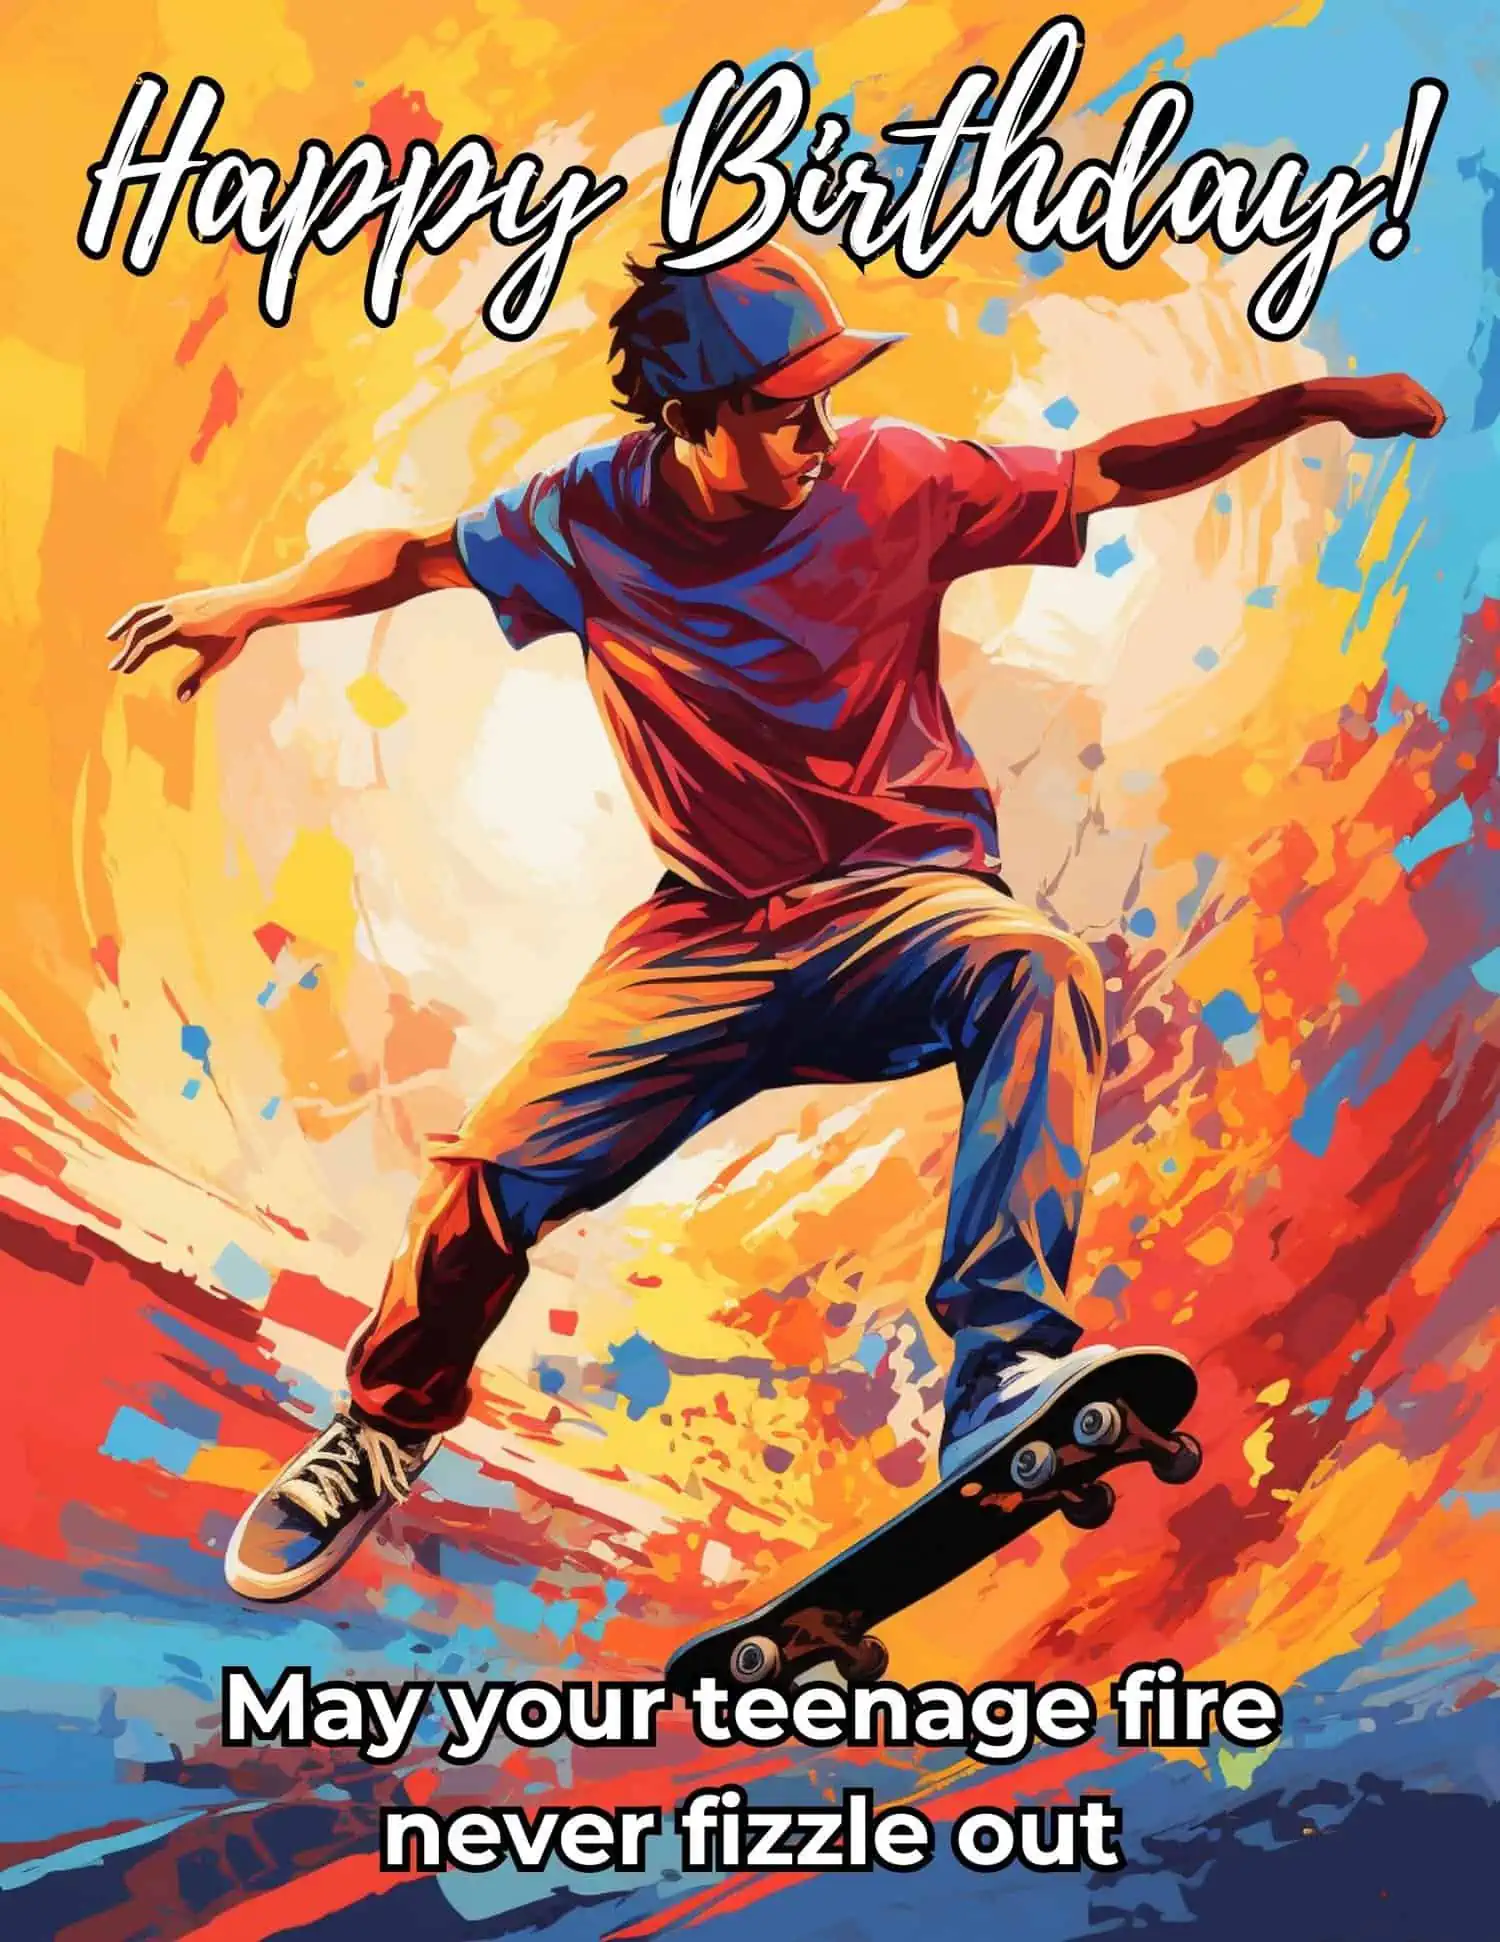 A compilation of relatable and heartfelt birthday wishes for your teenage son.